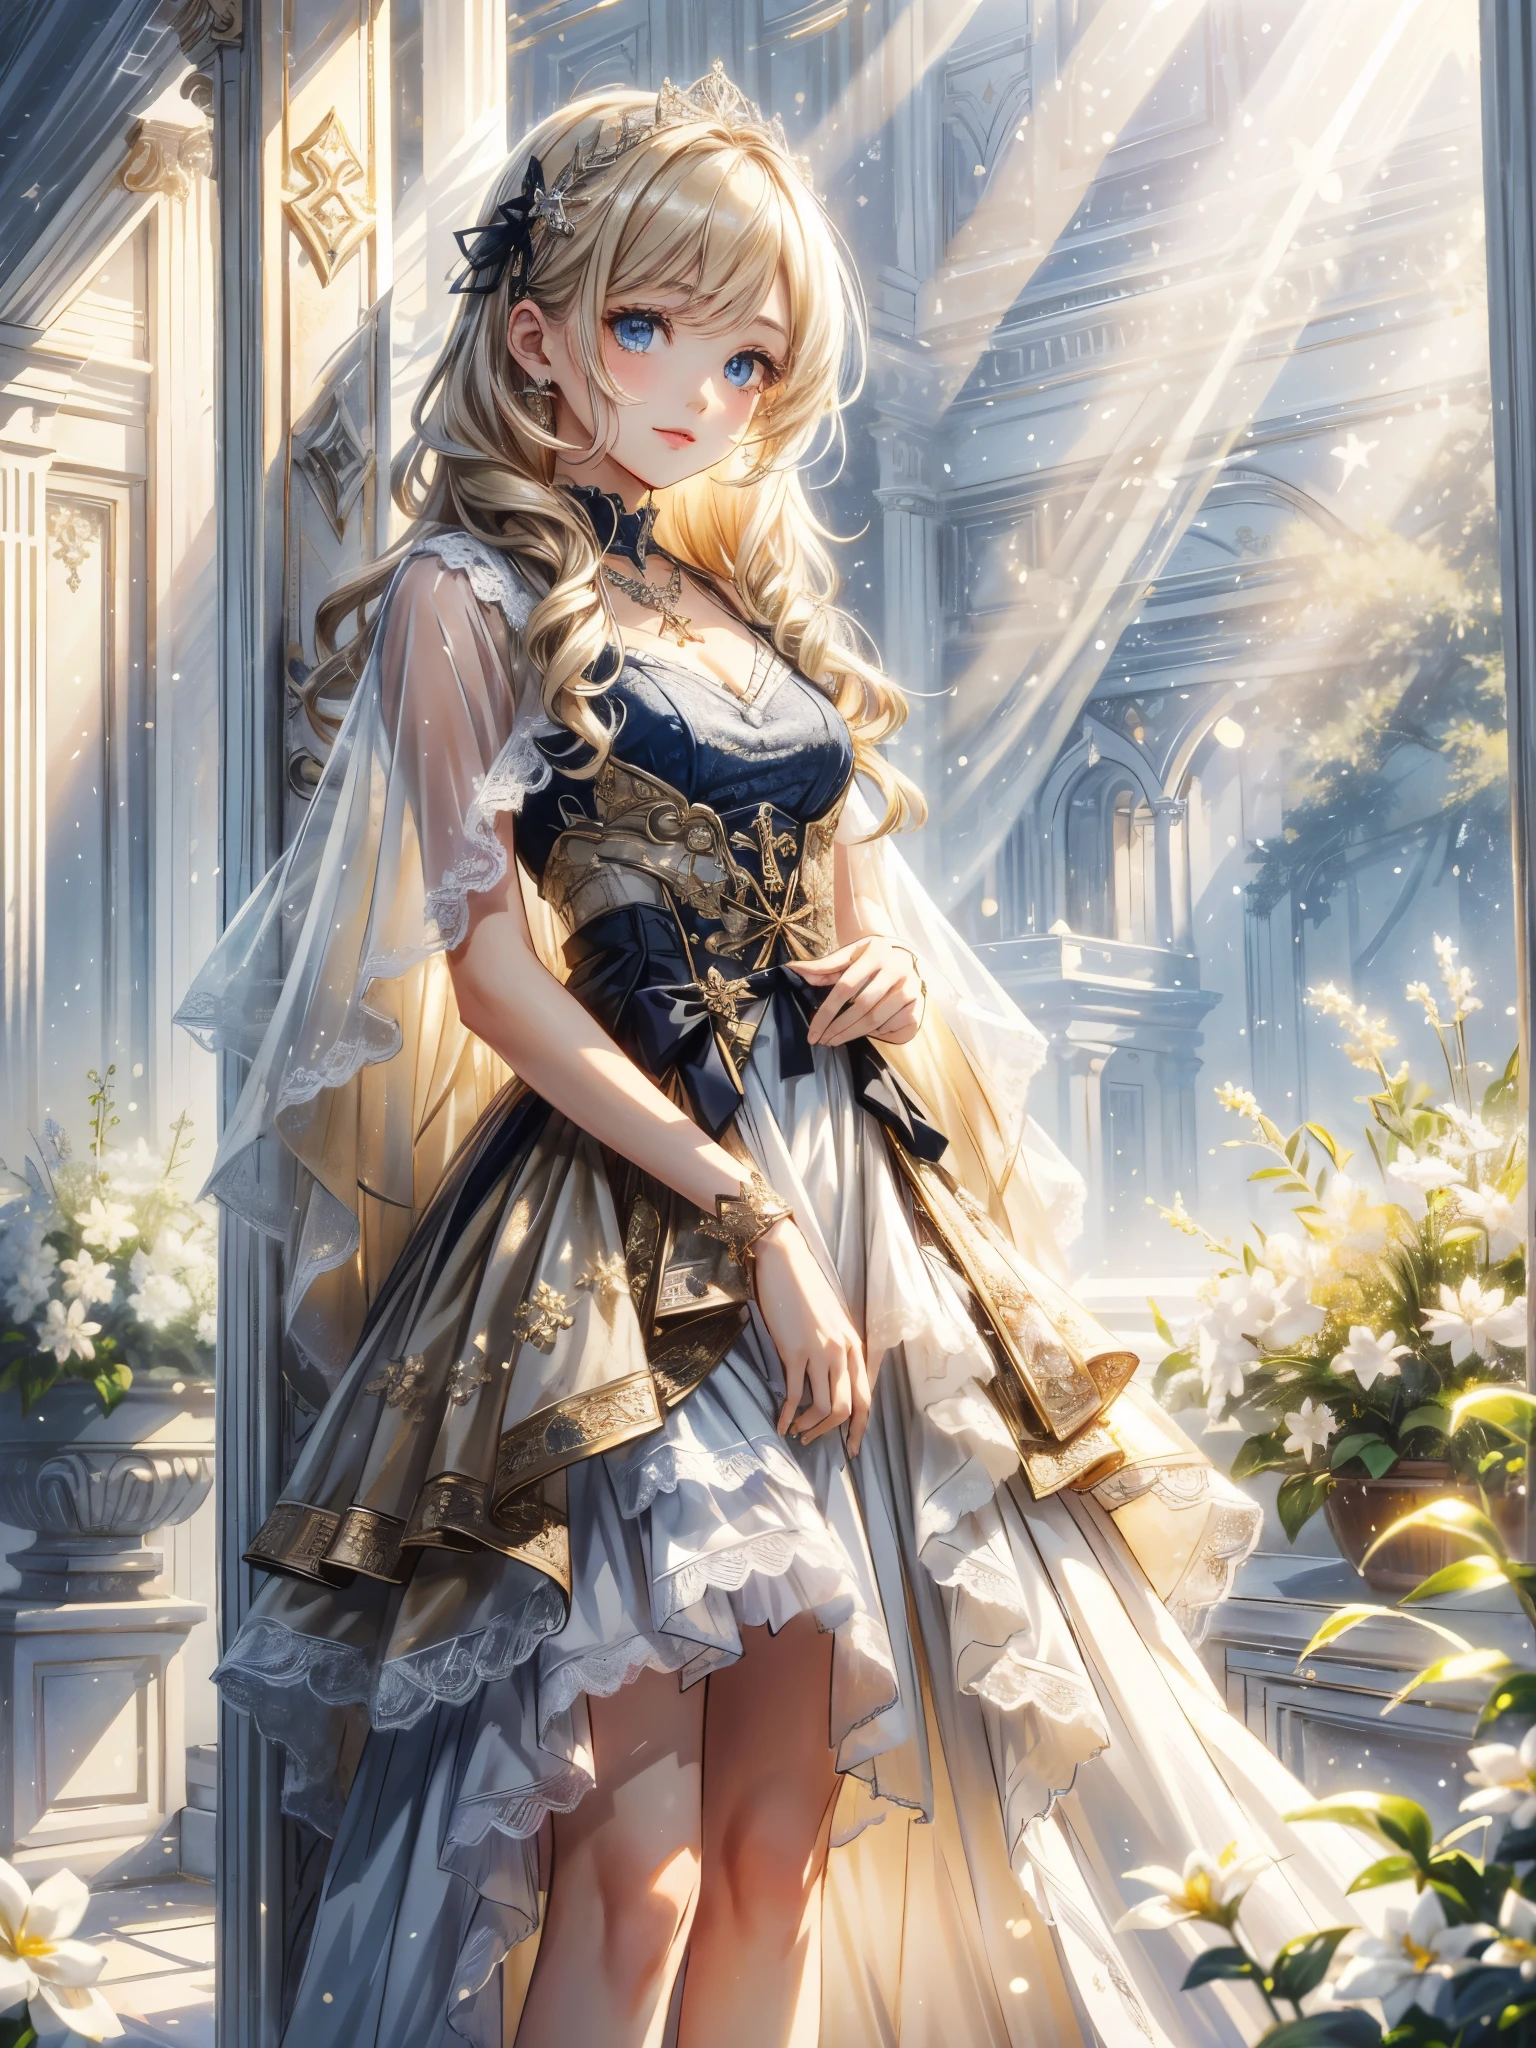 (​masterpiece),(top-quality:1.2),1girl in,(masuter piece:1.3),exquisitedetails, Highest quality 8K resolution, Ultra-detailed, Realistic, Vibrant colors, Soft tones, With warm and gentle lighting,(Smooth straight blonde hair:1.2),(Hair parted in the middle:1.3),(Glowing hair),(Dark blue eyes:1.3),White skin, hair clips,Small necklace,A gentle feeling overflows,The sun's rays illuminate joy and pure love, Warm golden glow,An atmosphere full of happiness and laughter, As if celebrating love,Ultra-detailed depiction and vivid colors,A style that combines romanticism and realism,depth of love,color palettes,Create an ethereal atmosphere like a dream,Soft and diffuse lighting,masterpiece artwork,  Woman standing against a wall wearing a beige dress and black boots, Beige, eora, ivory, soft silk dress, with cape, beige colors, ( ivory black ), asa, pastel, sandy beige, Olivia,  Dress, elegent, taupe, multilayered outfit